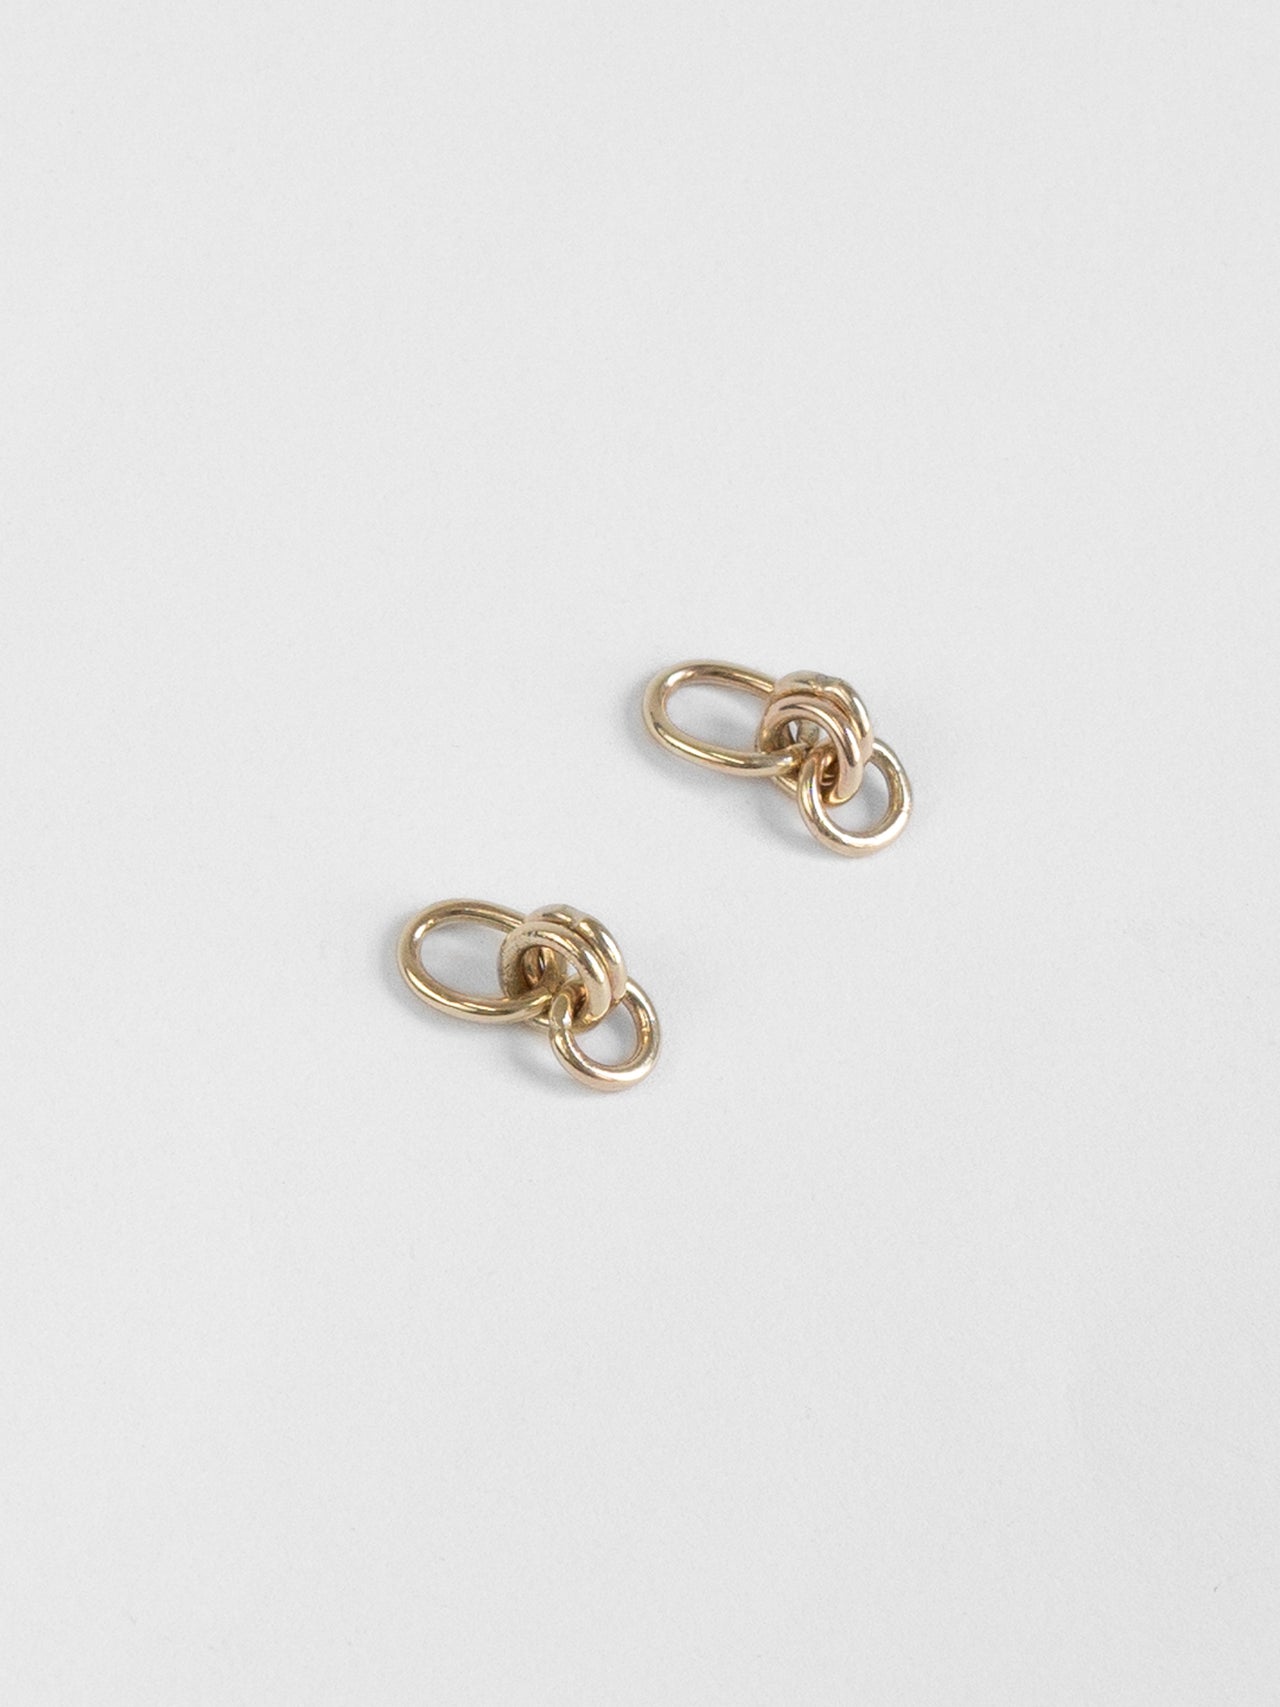 The Lair Jewellery Tansui Earrings Small 9ct Yellow Gold